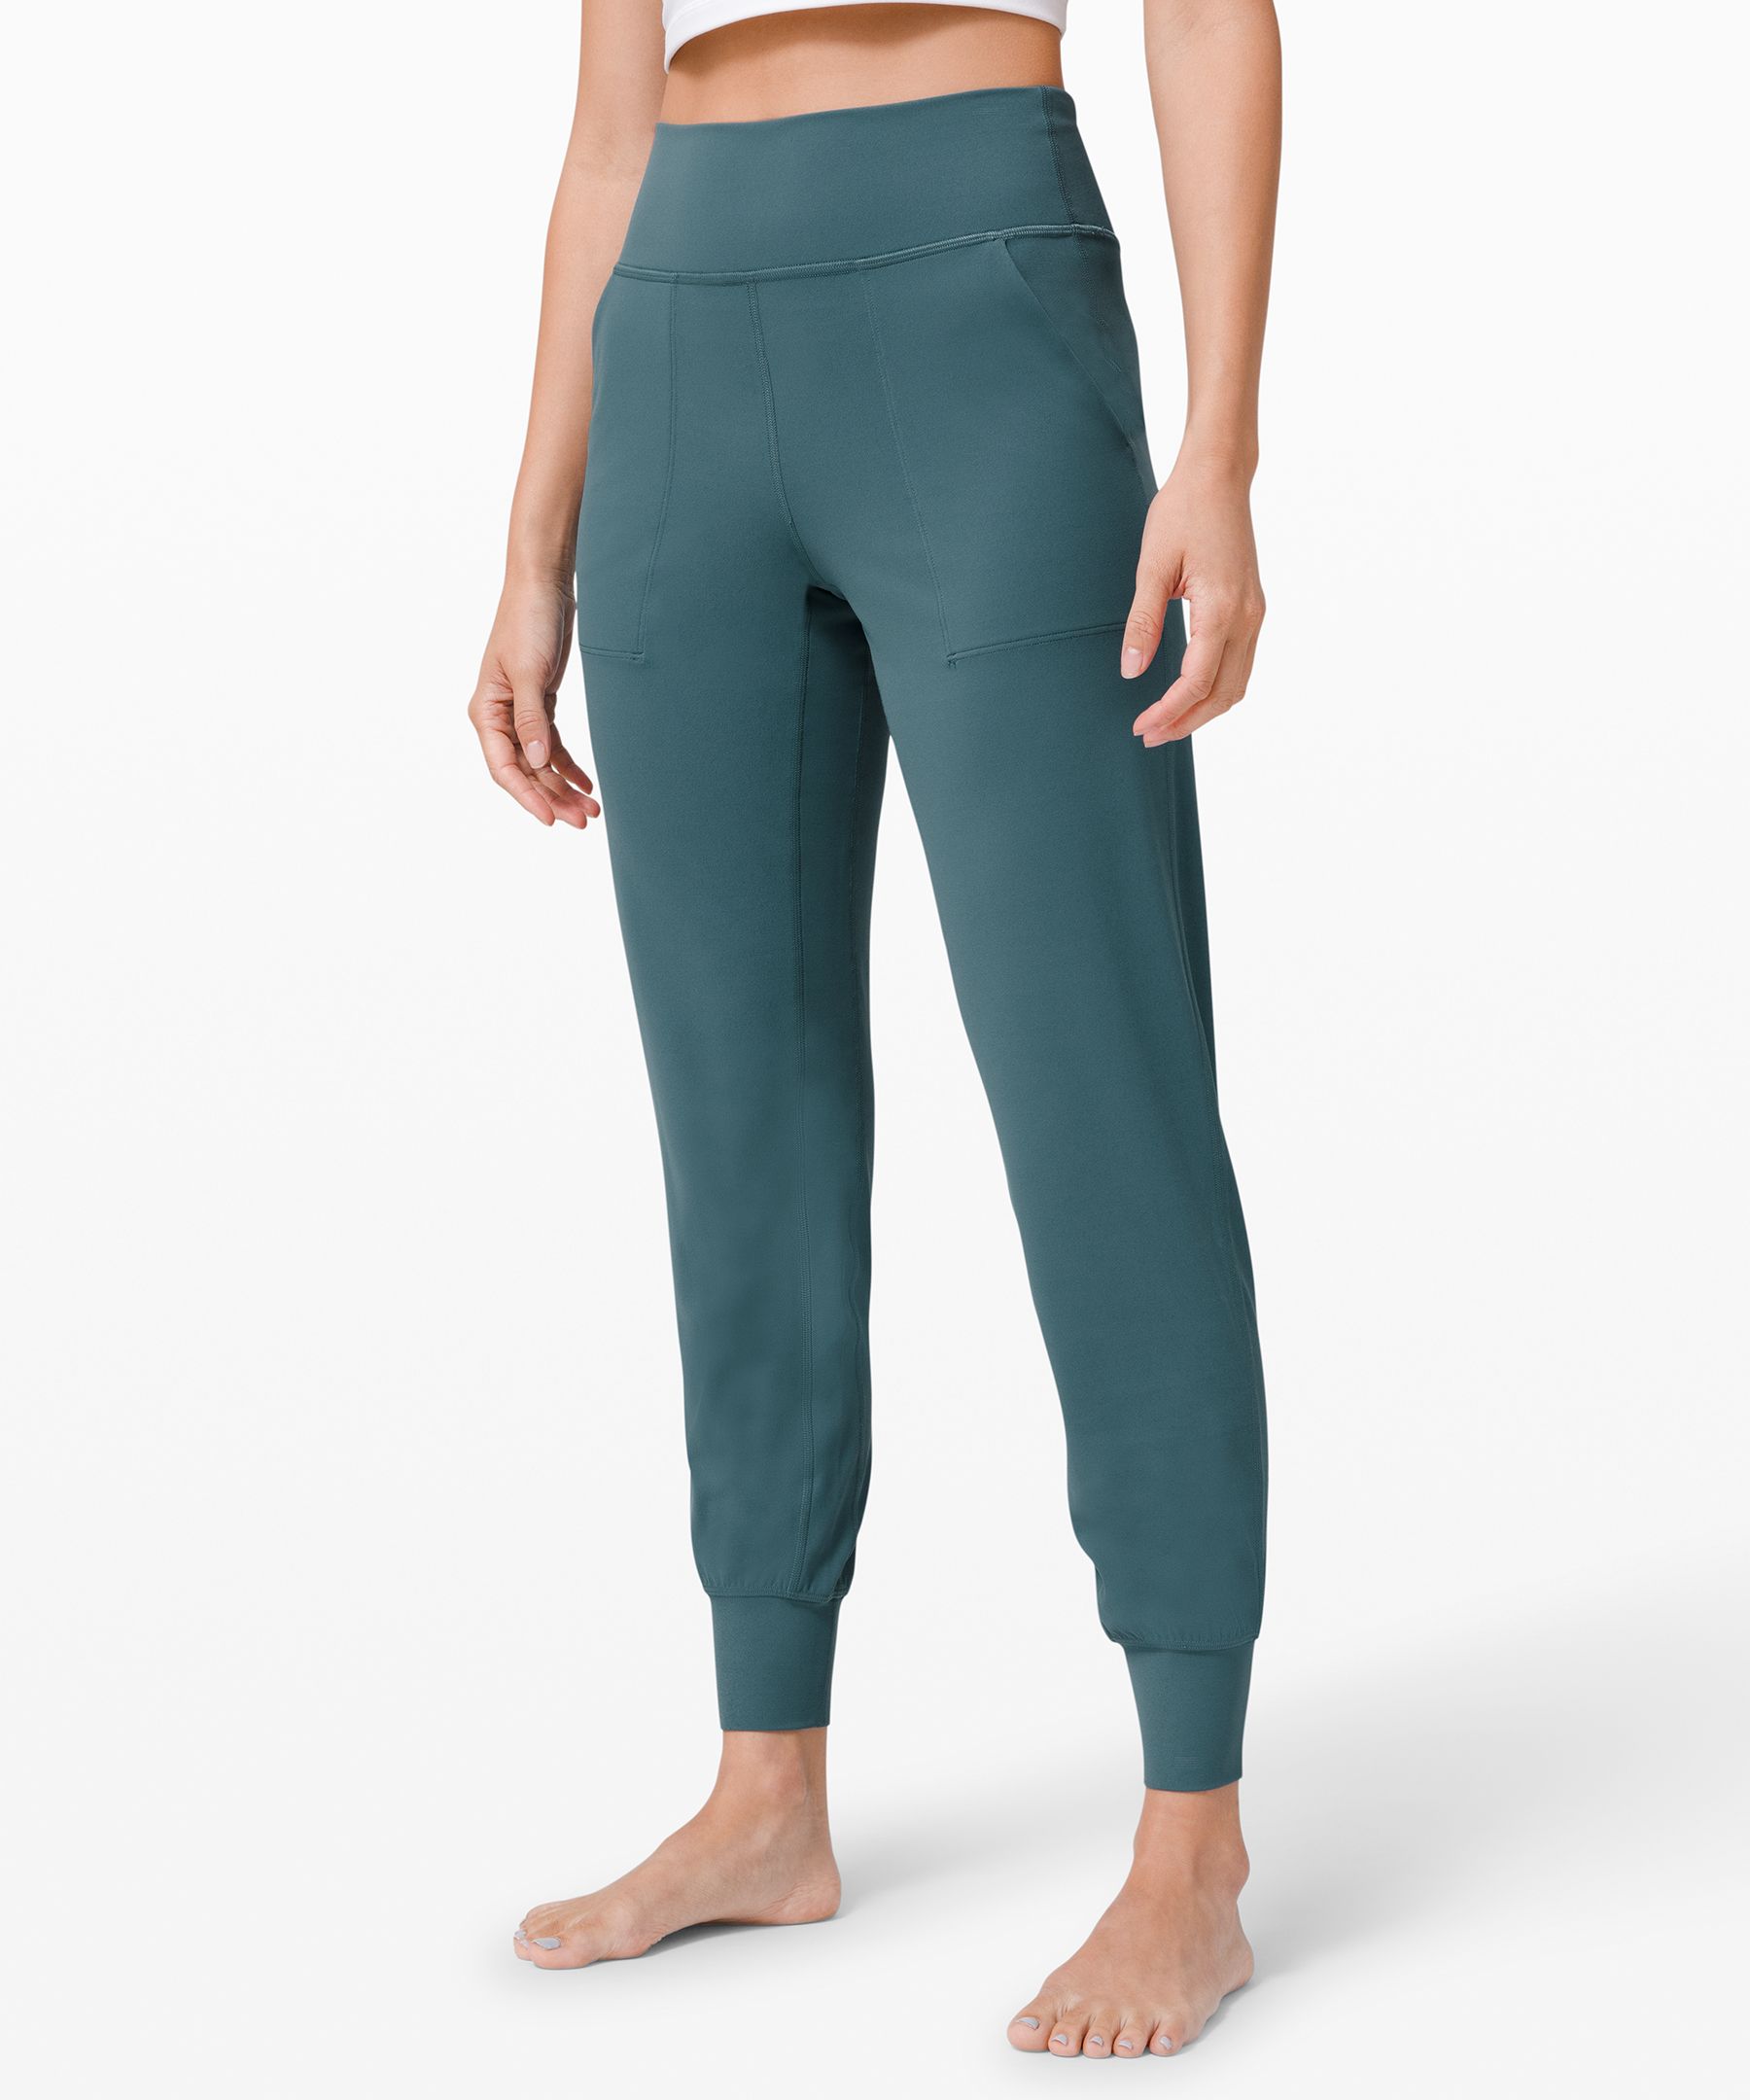 align joggers (4 blk) & love long sleeve (0 heathered core ultra